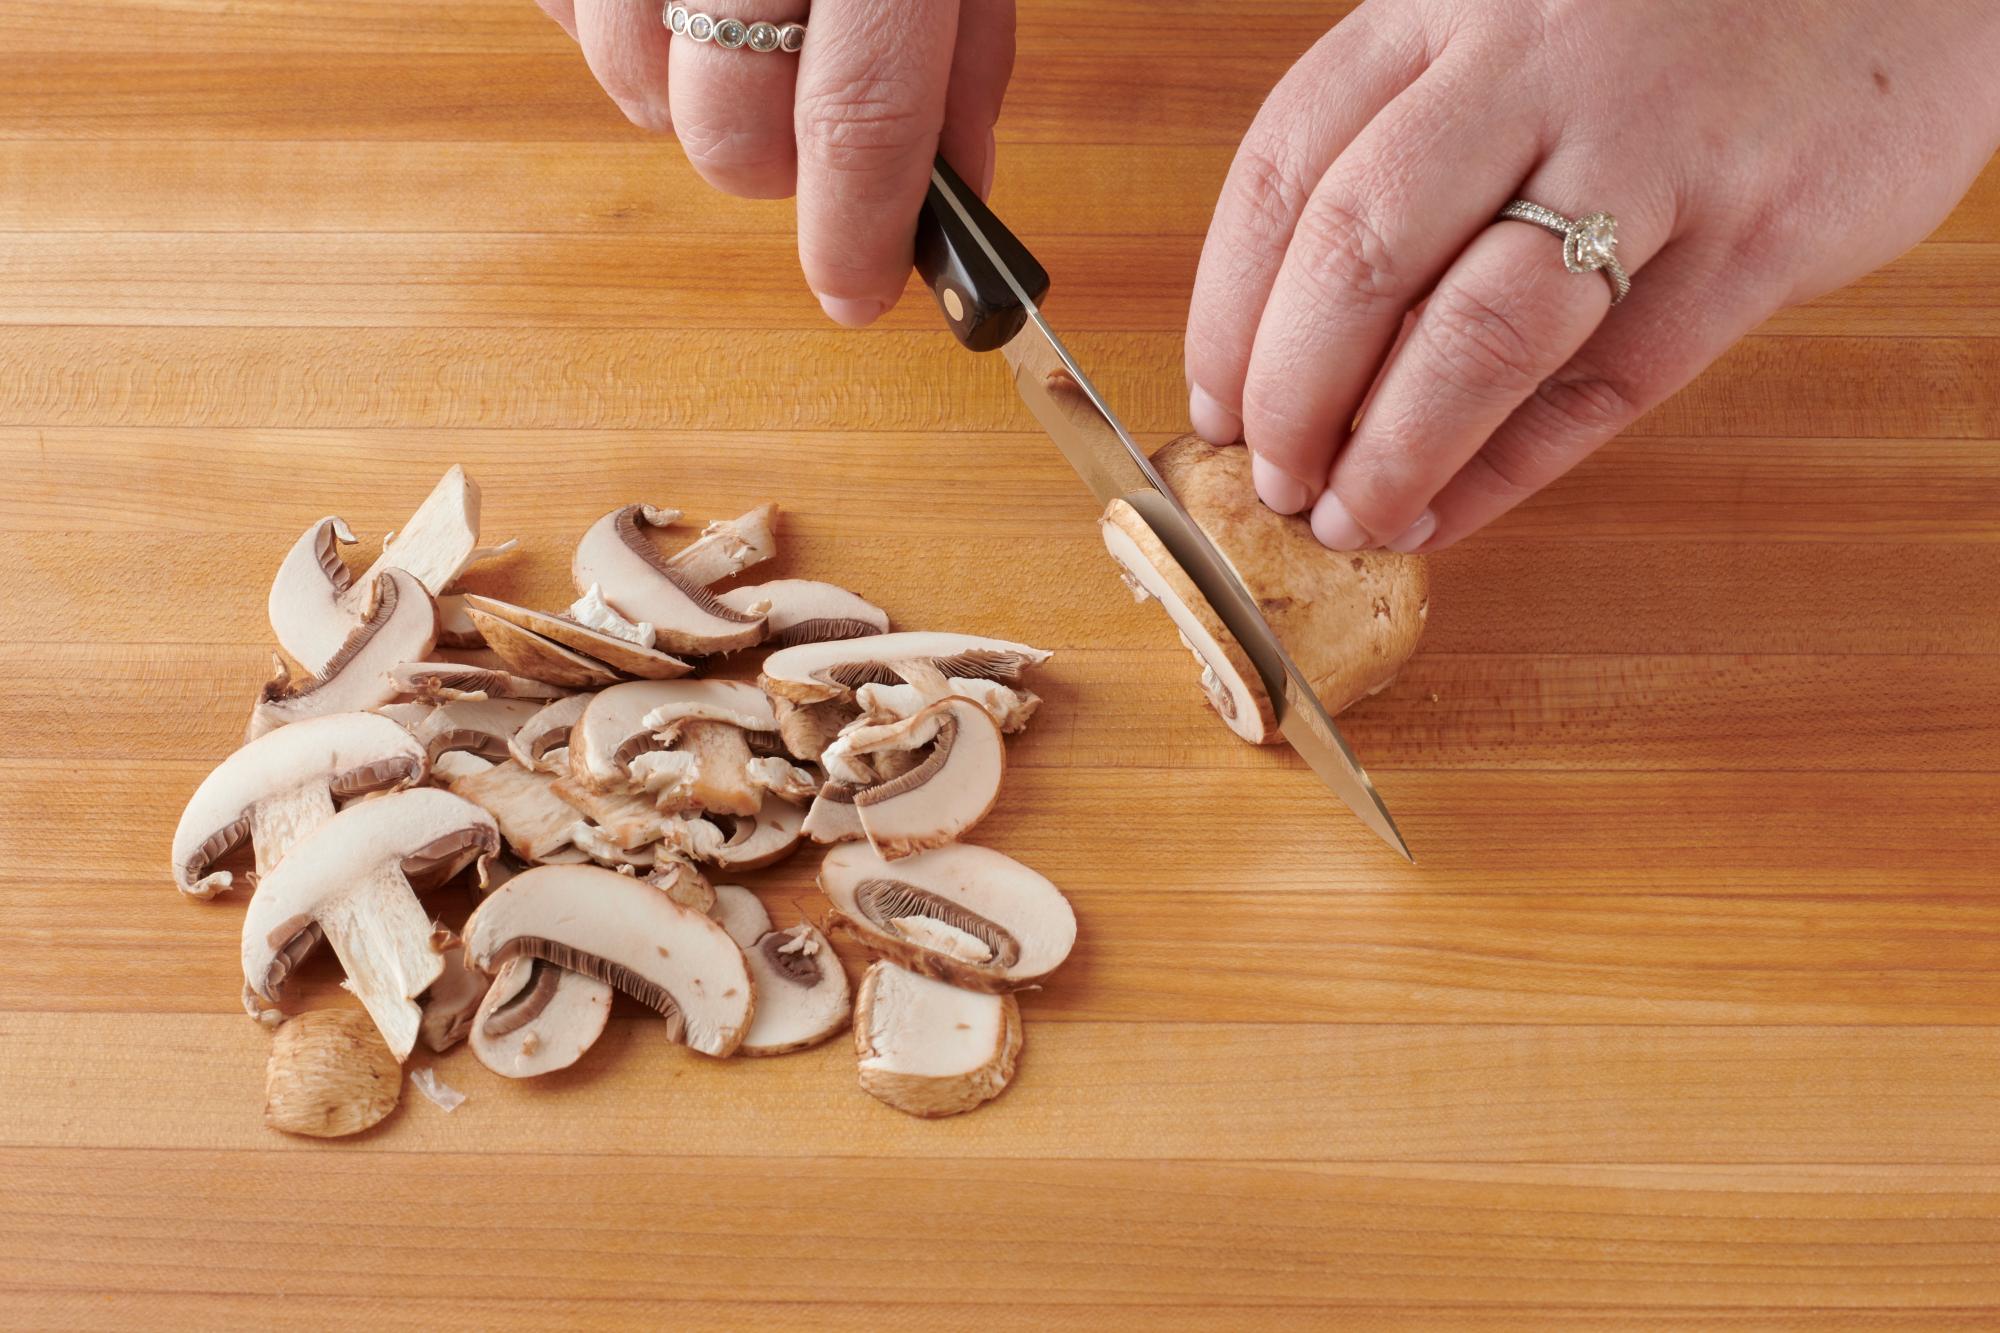 Slicing mushrooms with a 4 Inch Paring Knife.